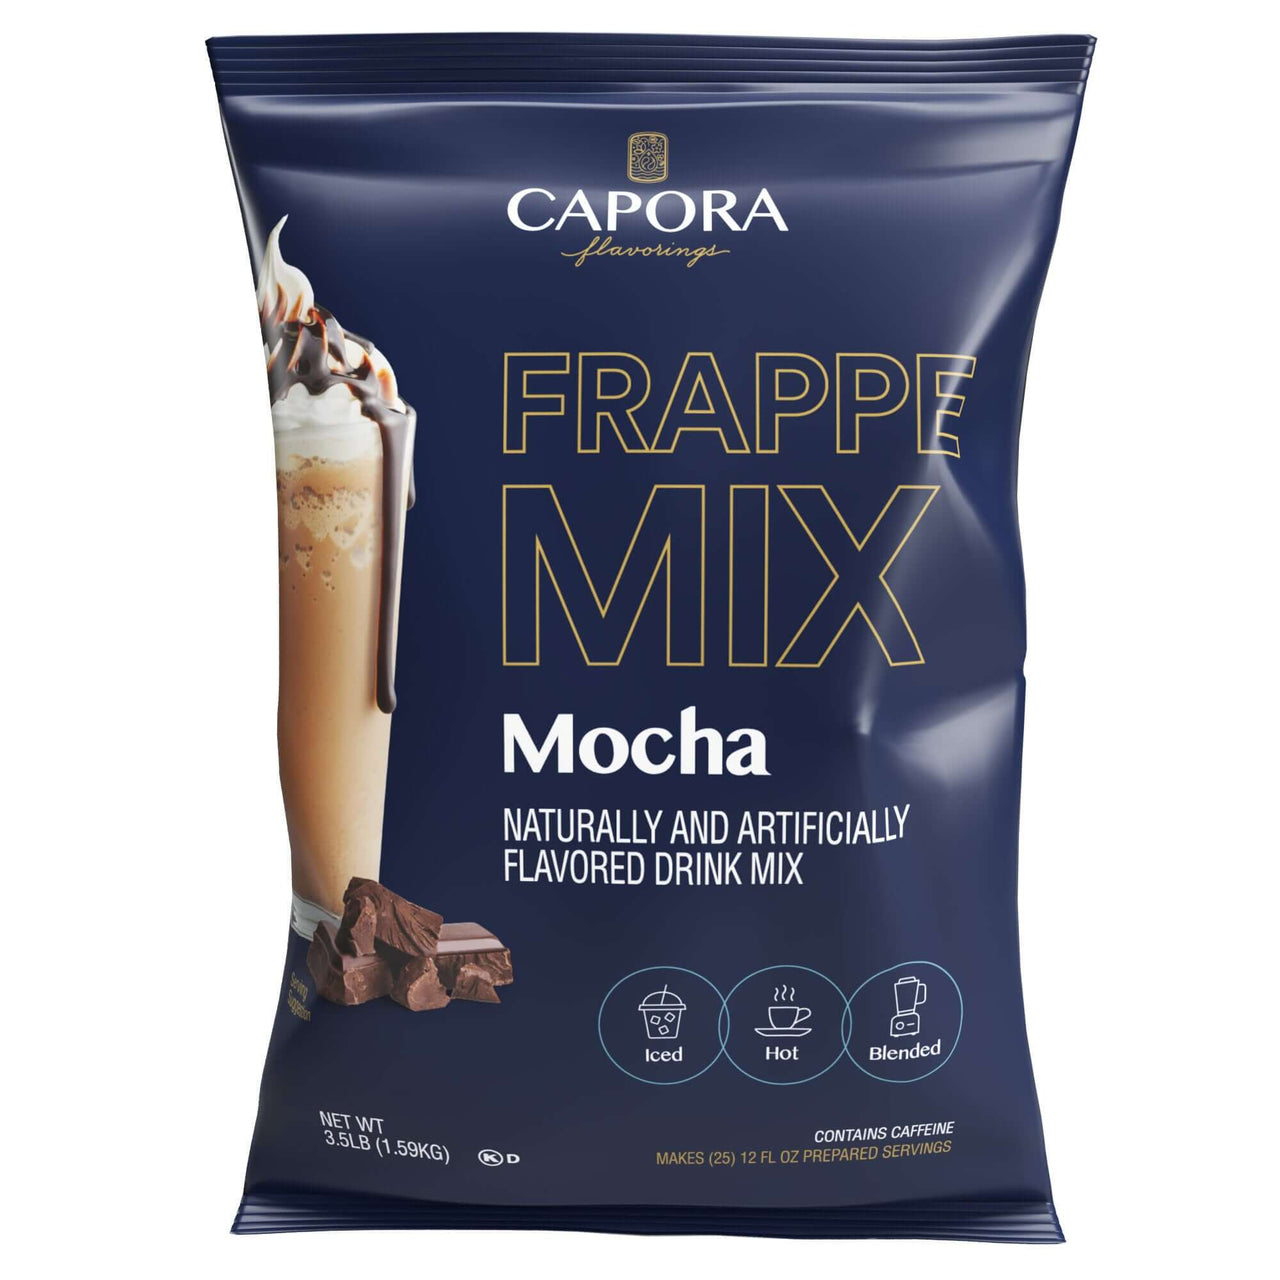 Capora 3.5 lb. Mocha Frappe Mix, Restaurant and Coffee Shop High Quality, Barista Approved